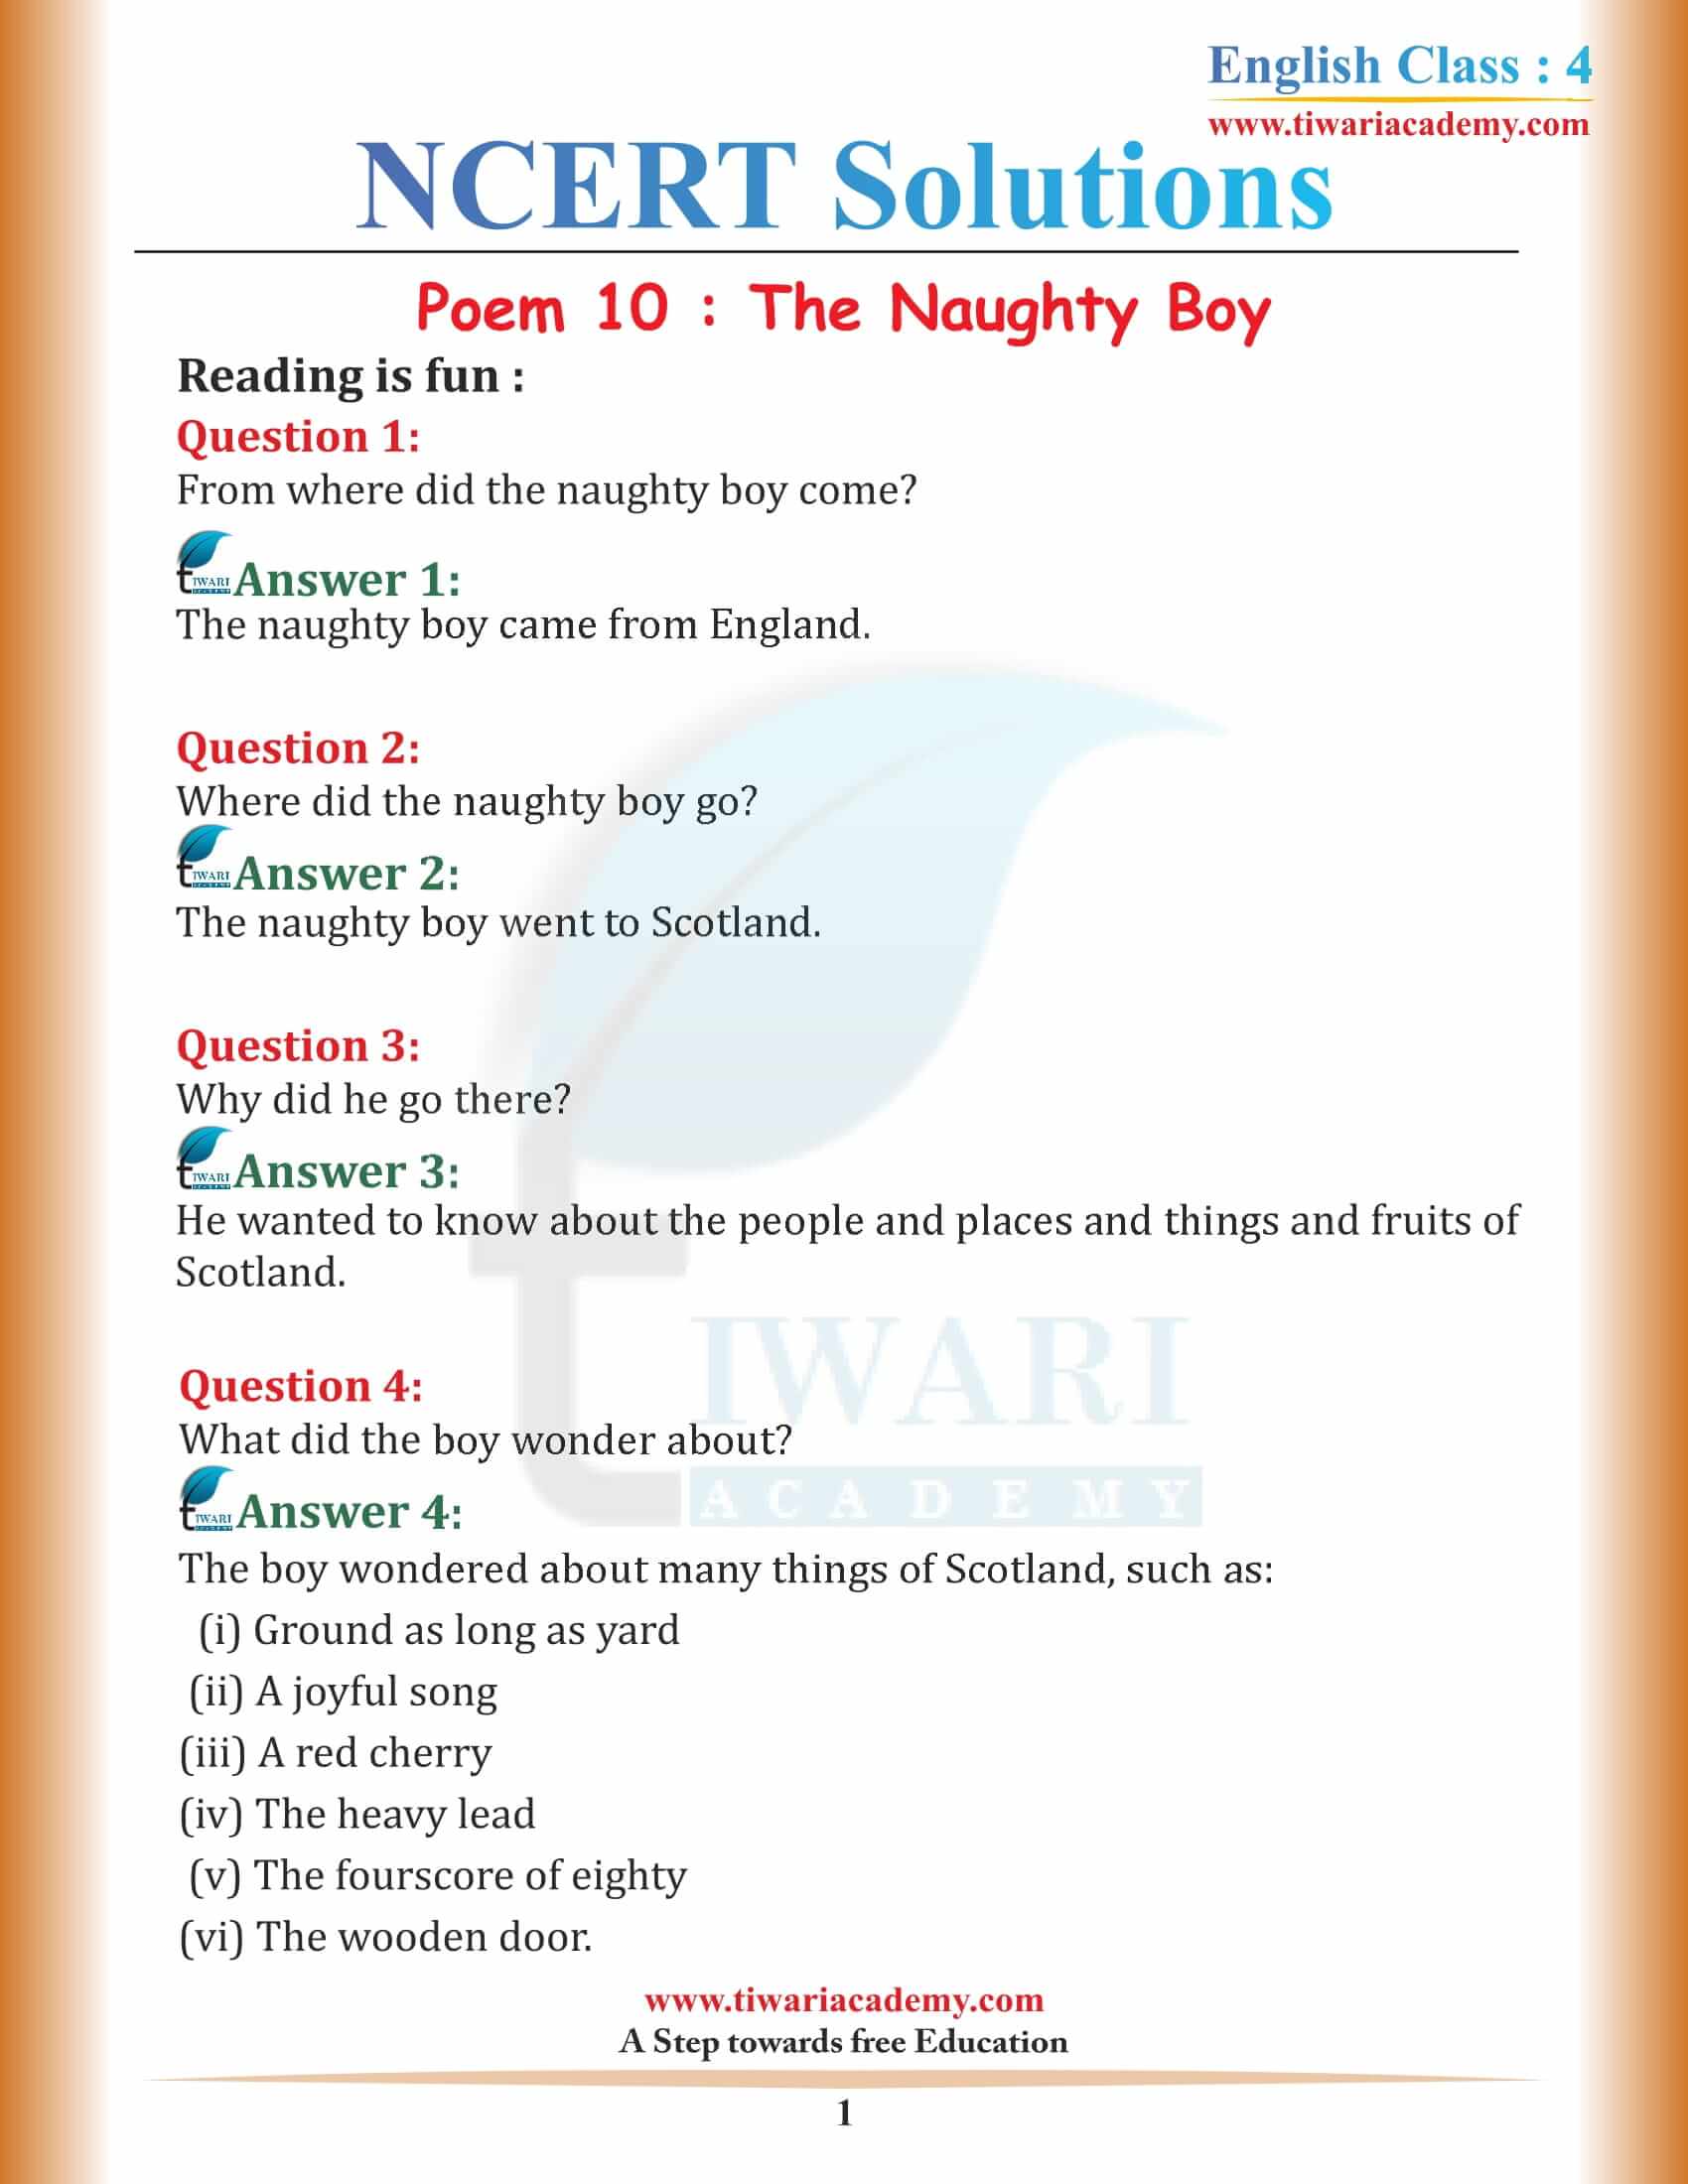 NCERT Solutions for Class 4 English Unit 10 Chapter 1 The Naughty Boy